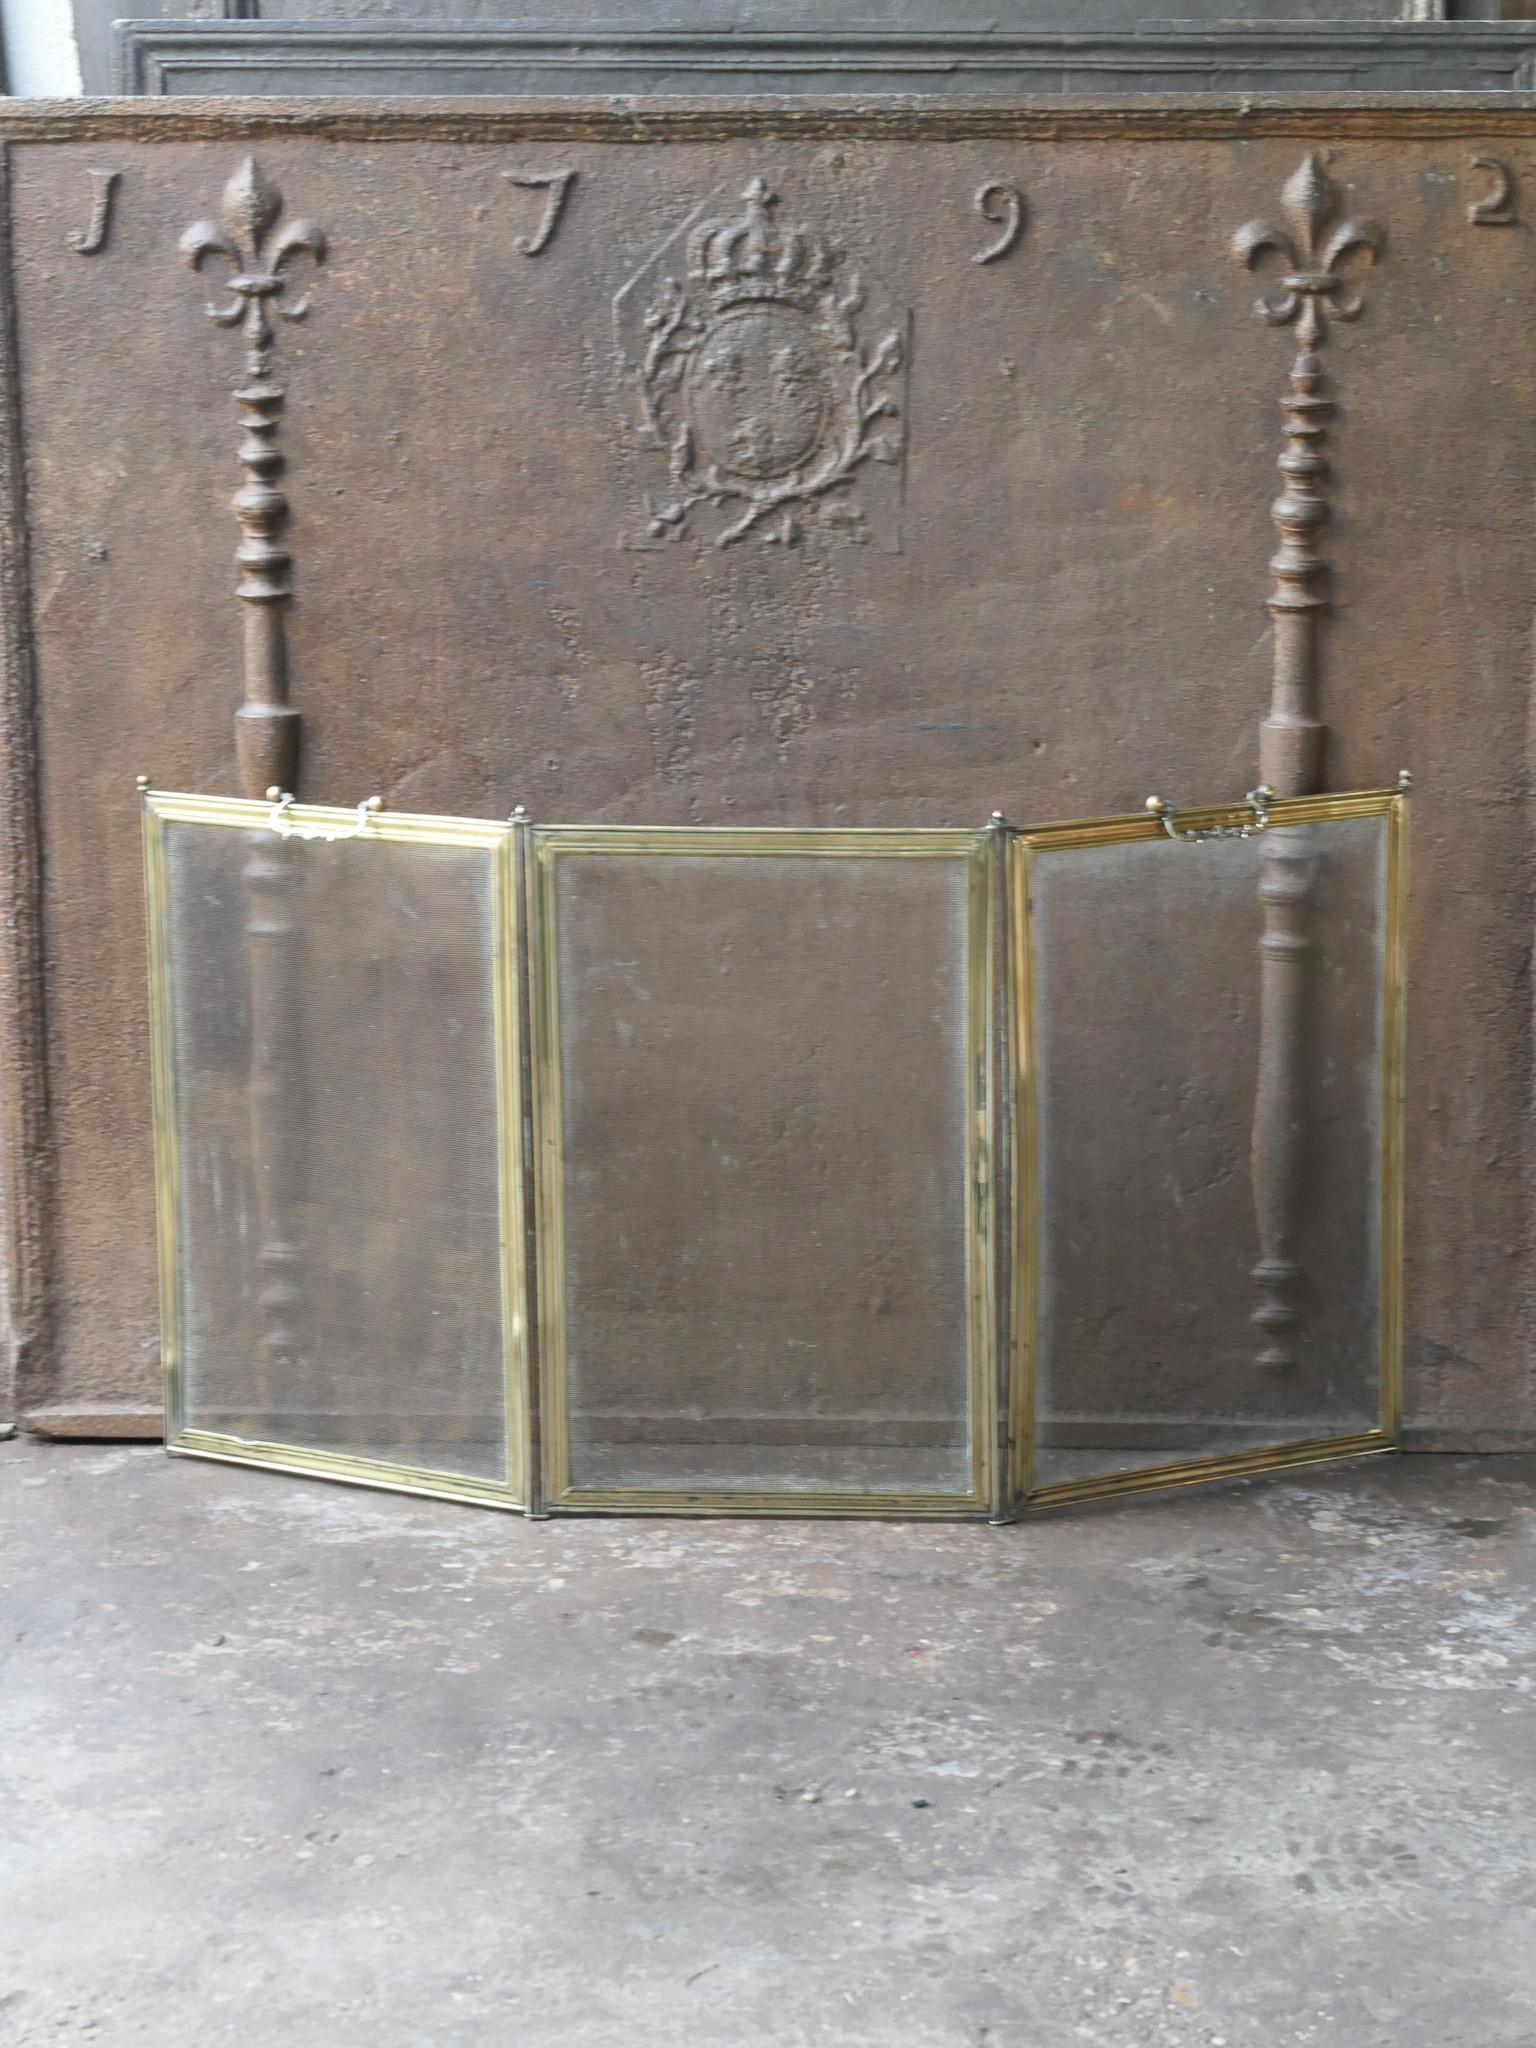 19th century French Napoleon III 3-panel fireplace screen. The screen is made of polished brass and iron mesh. It is in a good condition and is fit for use in front of the fireplace.